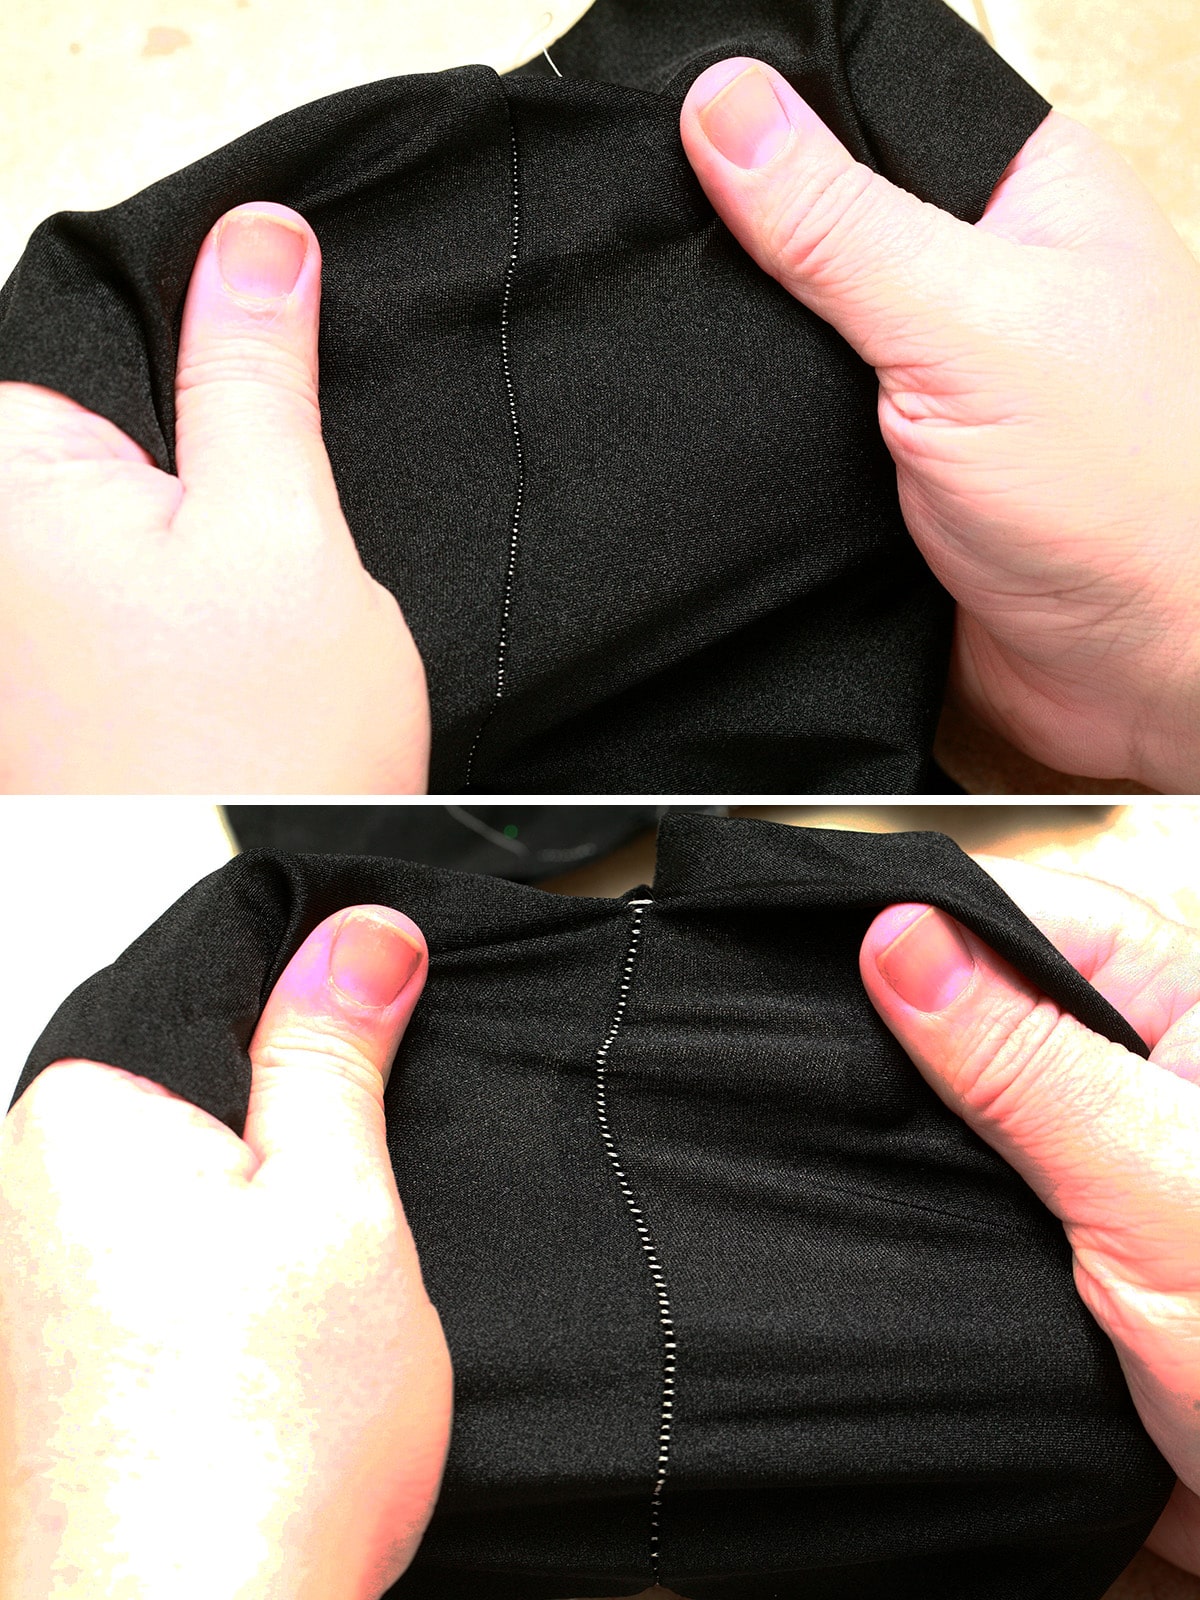 A two part compilation image showing the right side of a seam sewn into black spandex.